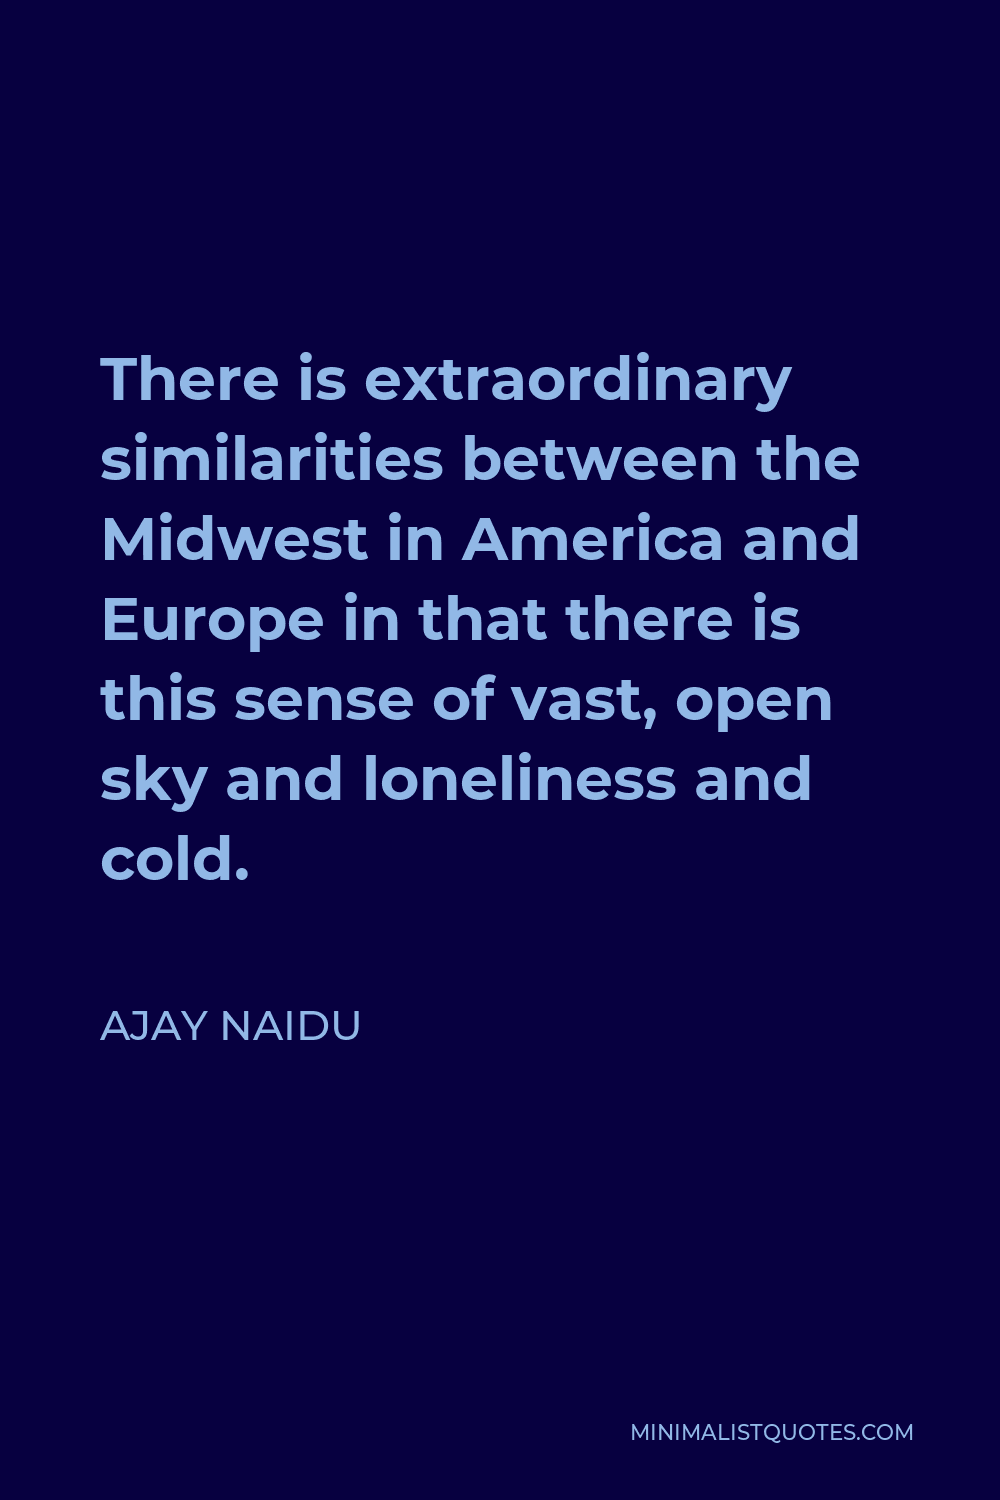 Ajay Naidu Quote - There is extraordinary similarities between the Midwest in America and Europe in that there is this sense of vast, open sky and loneliness and cold.